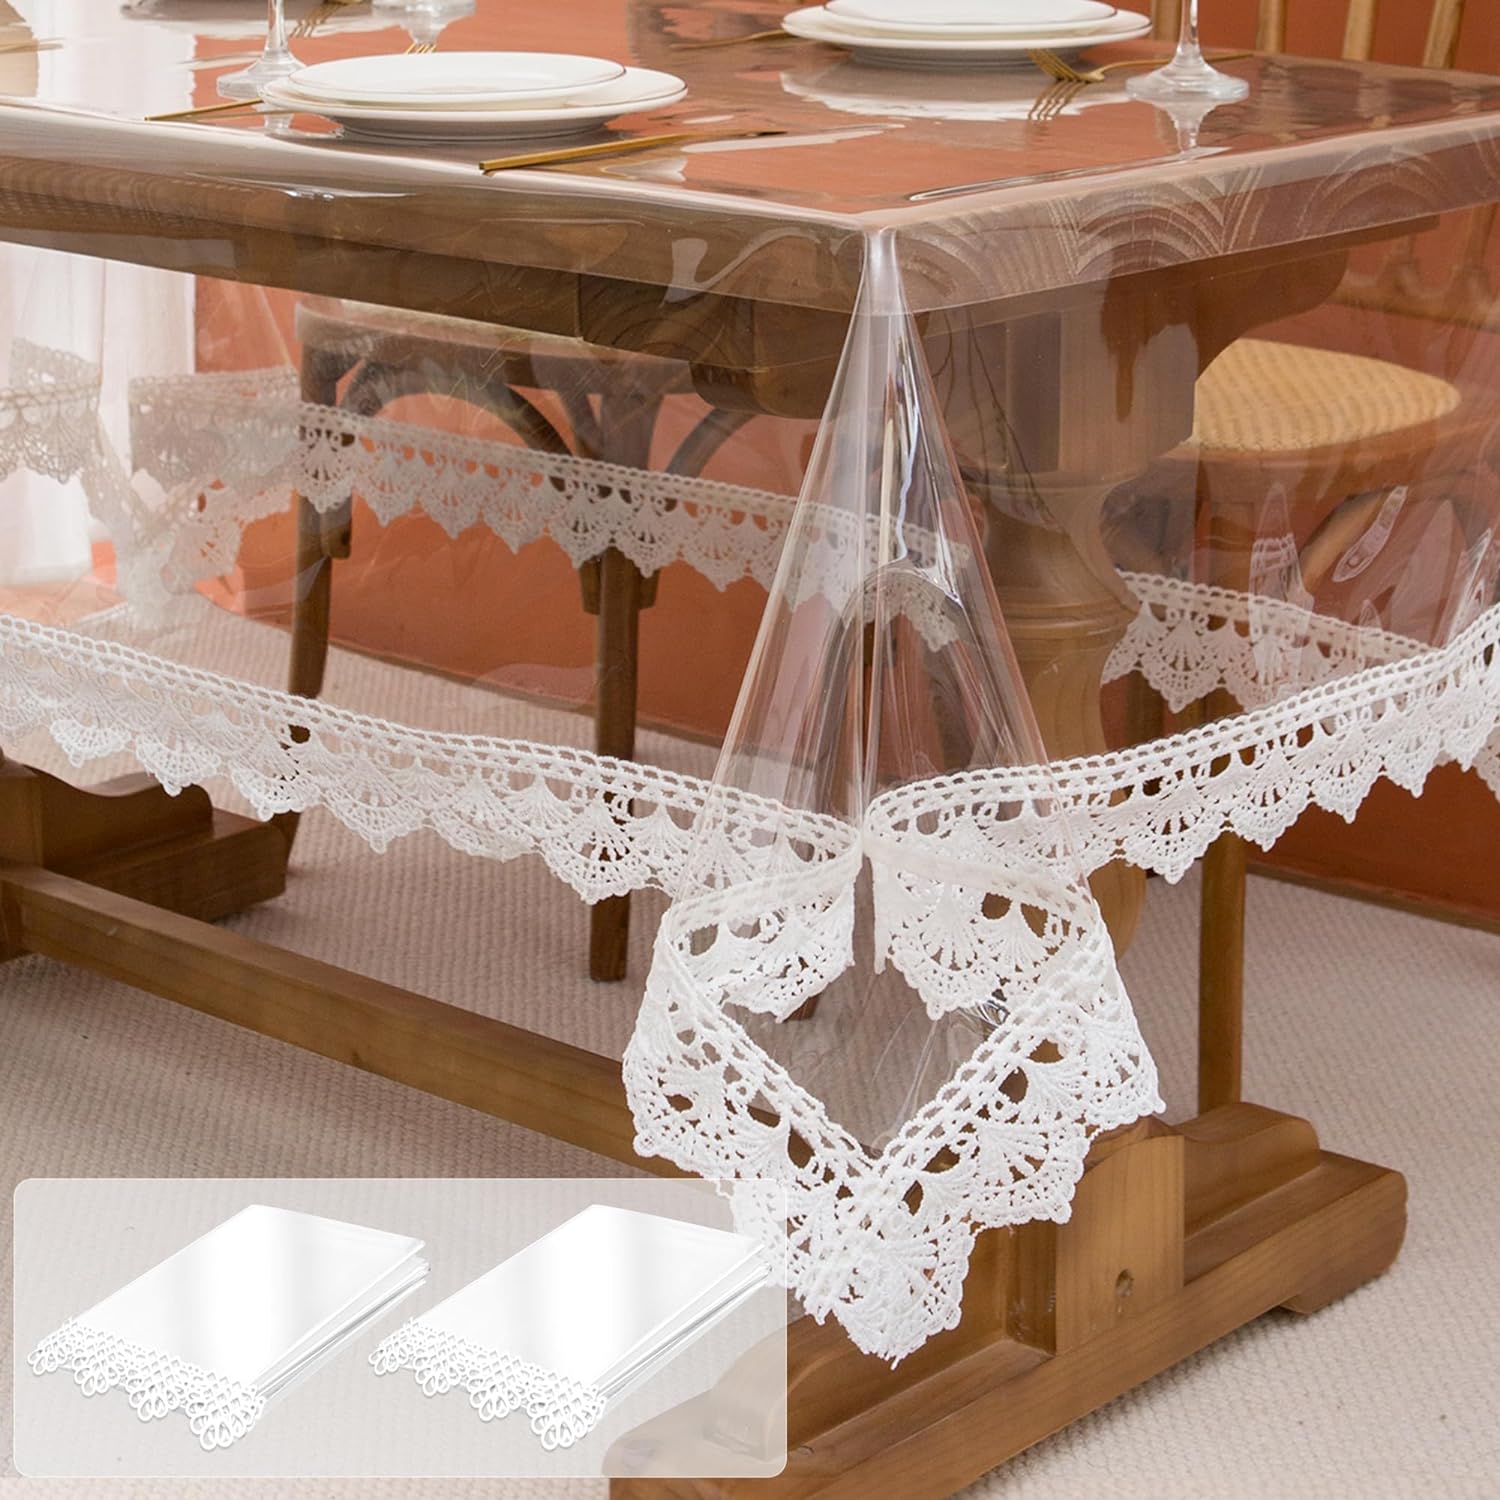  sancua 2 Pack Clear Plastic Table Cover Protector 54 x 78 inch, Rectangle Transparent PVC Table Cloth with Lace Edge 100% Waterproof Vinyl Tablecloths for Dining Kitchen Indoor Outdoor 